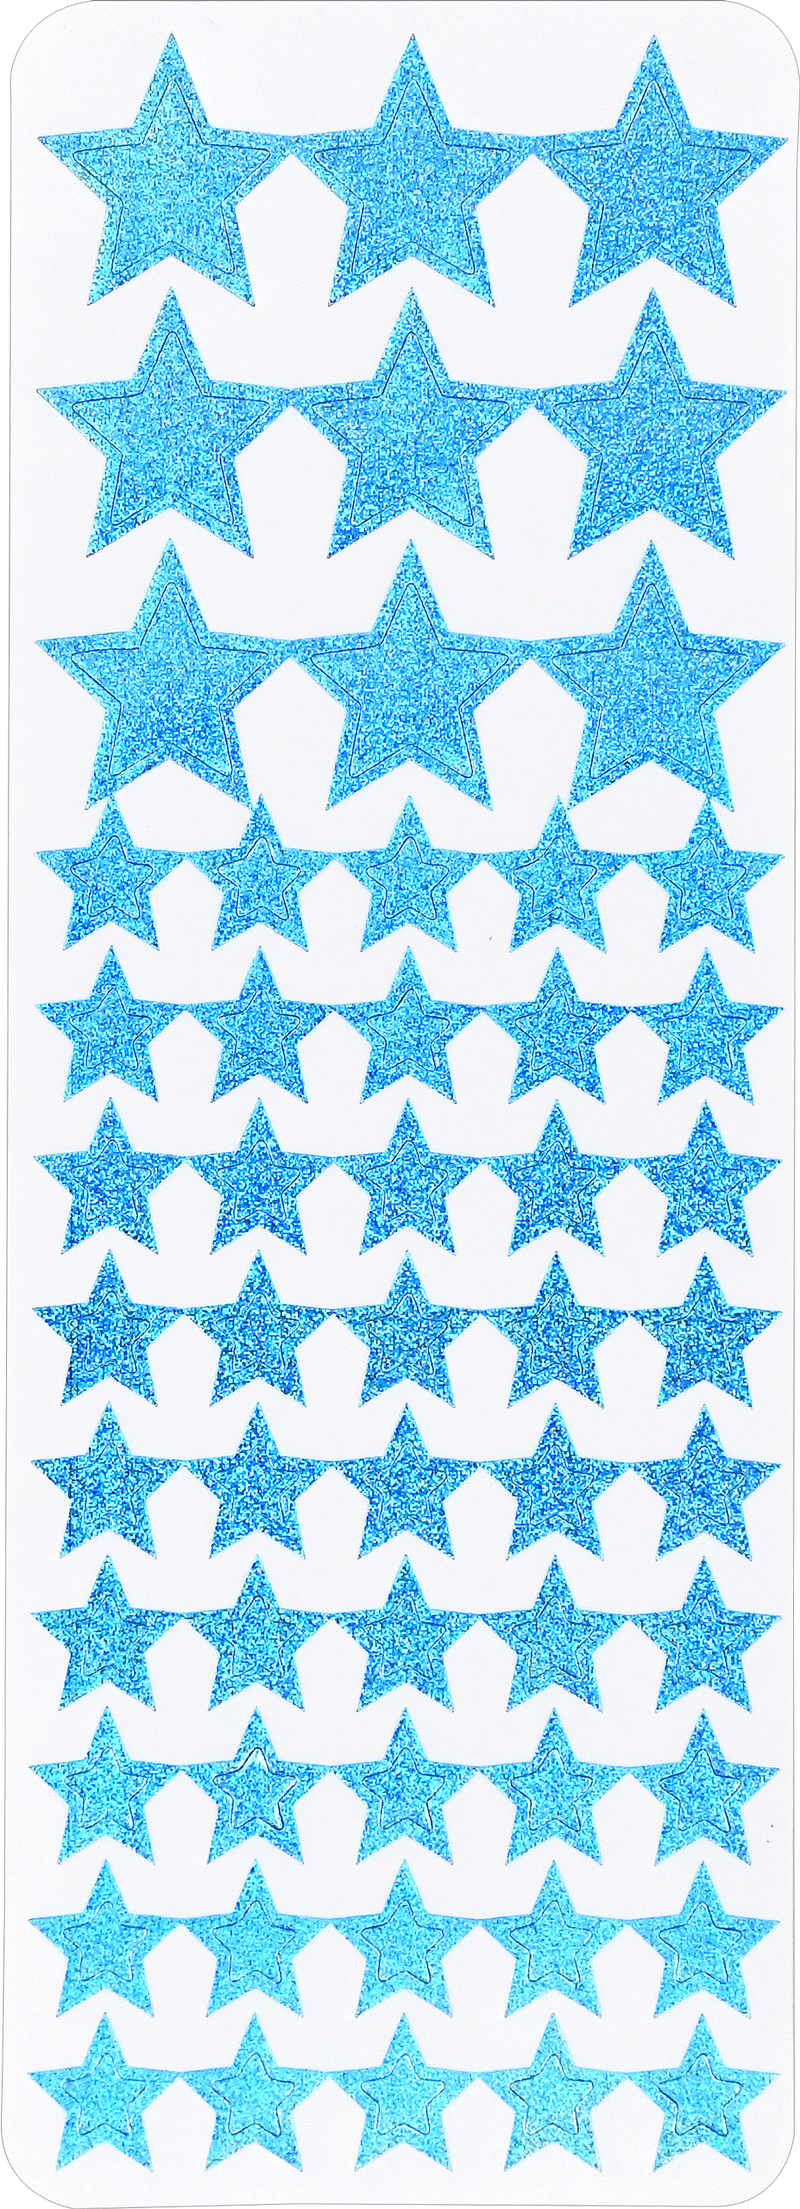 Foil Star Stickers - Assorted Colors - TownStix